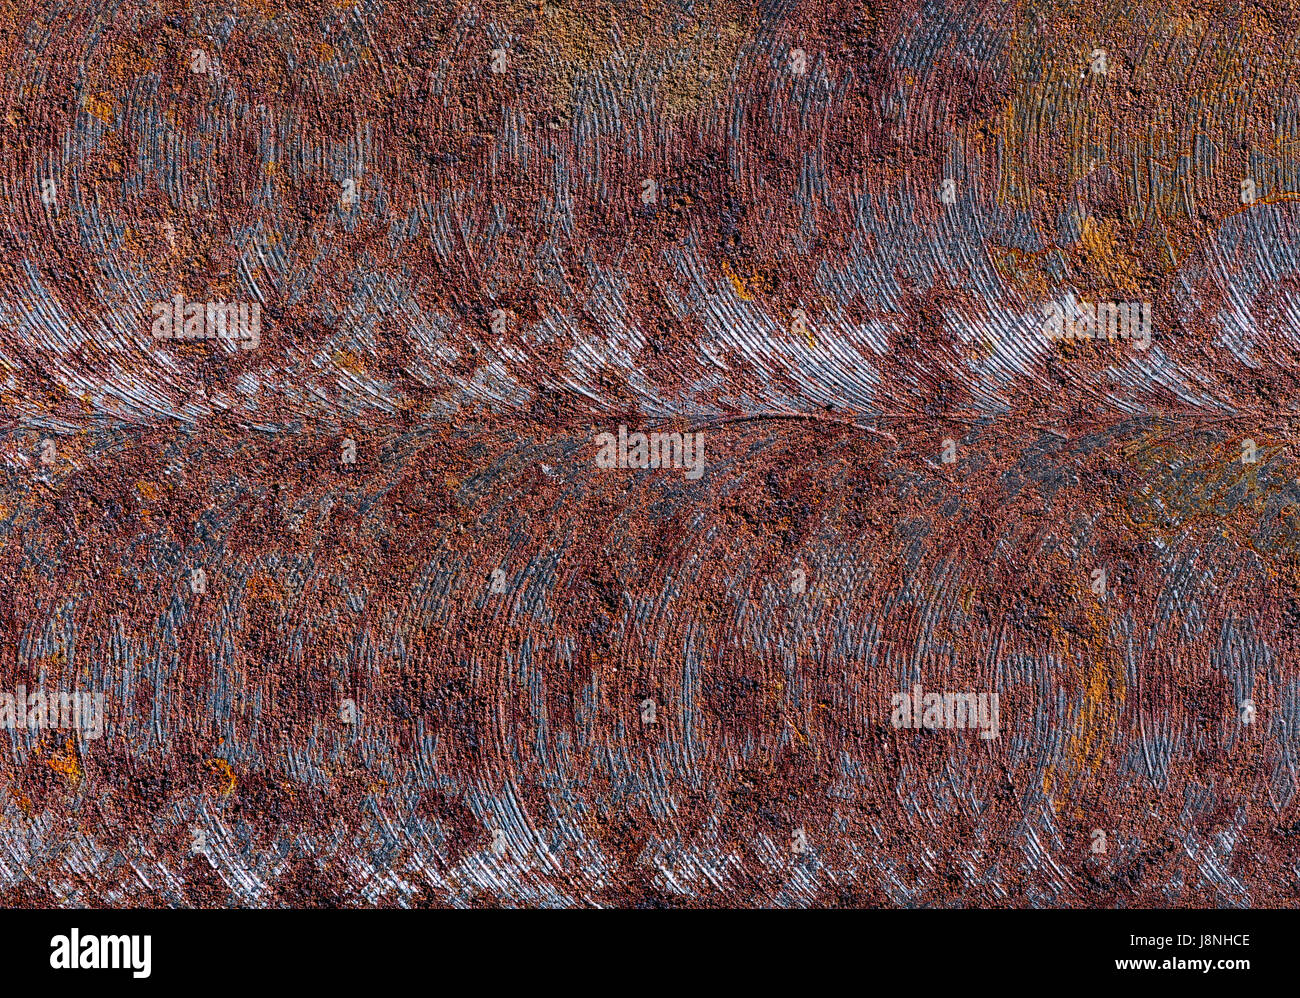 Texture of rusty metal. The milled metal surface is covered in places with a touch of rust Stock Photo